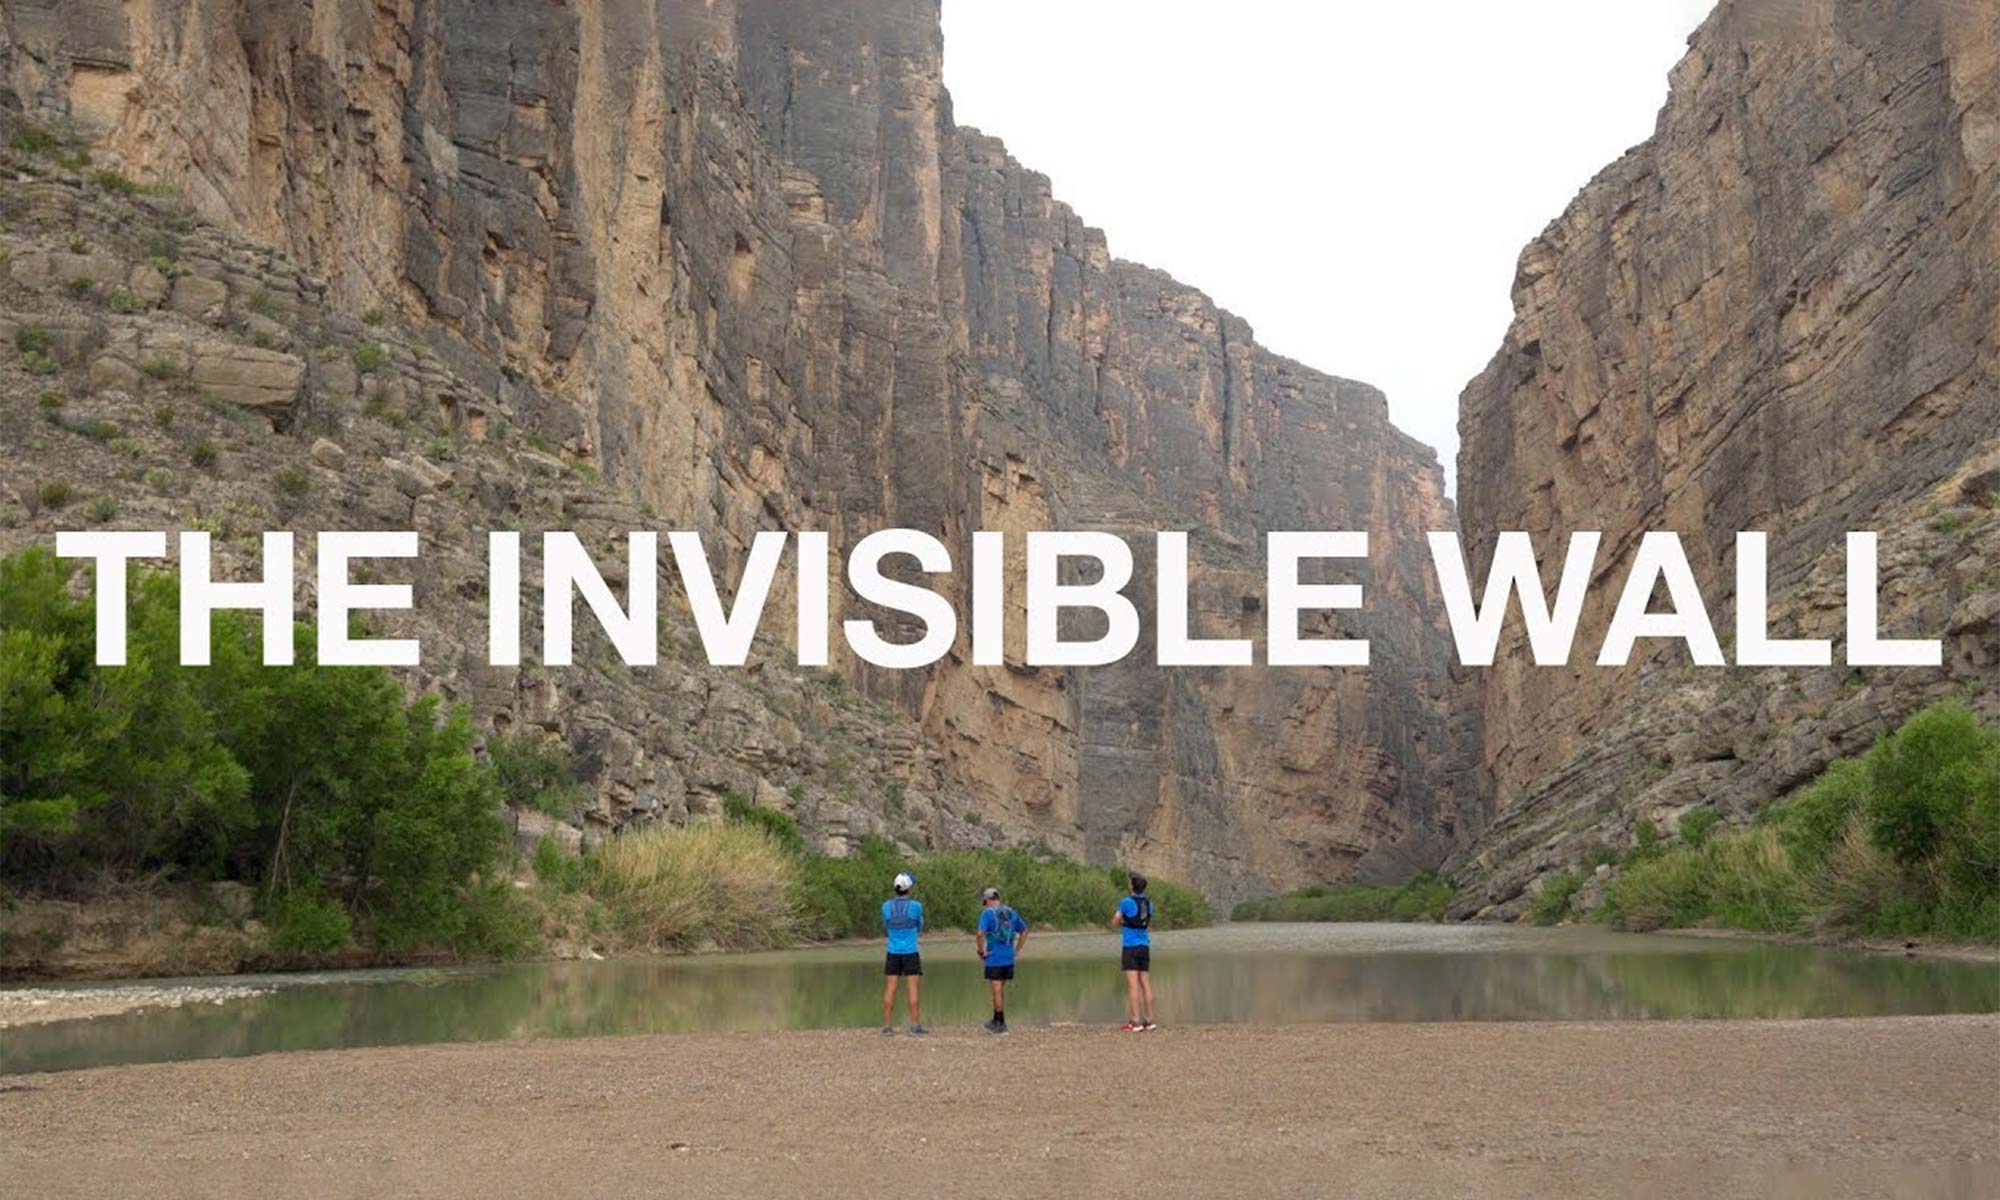 The invisible wall